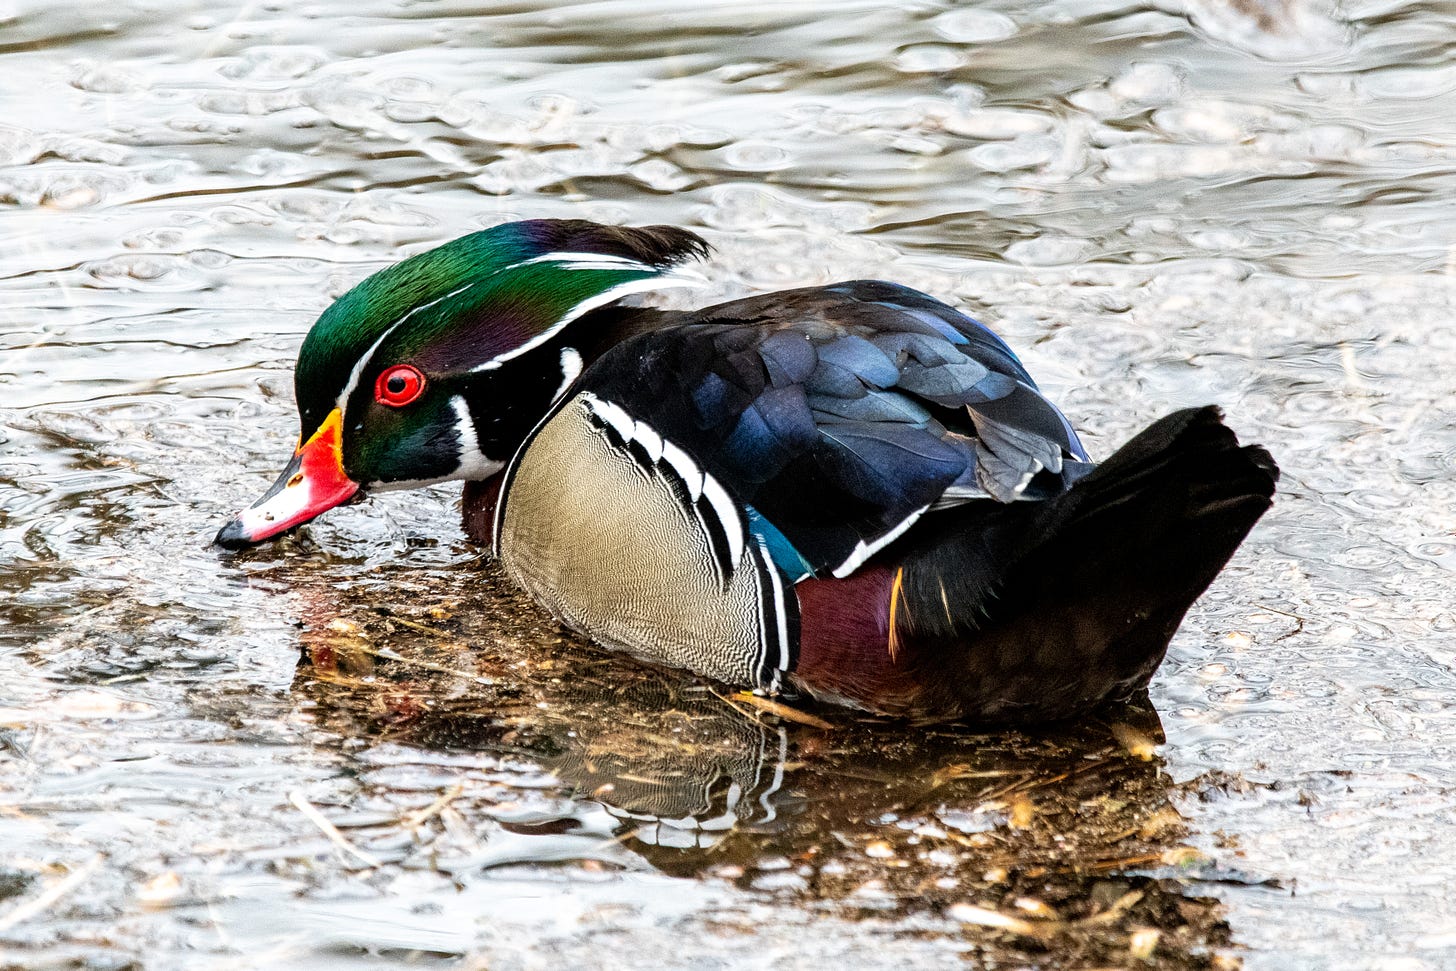 A wood duck, in bright plumage, dabbling